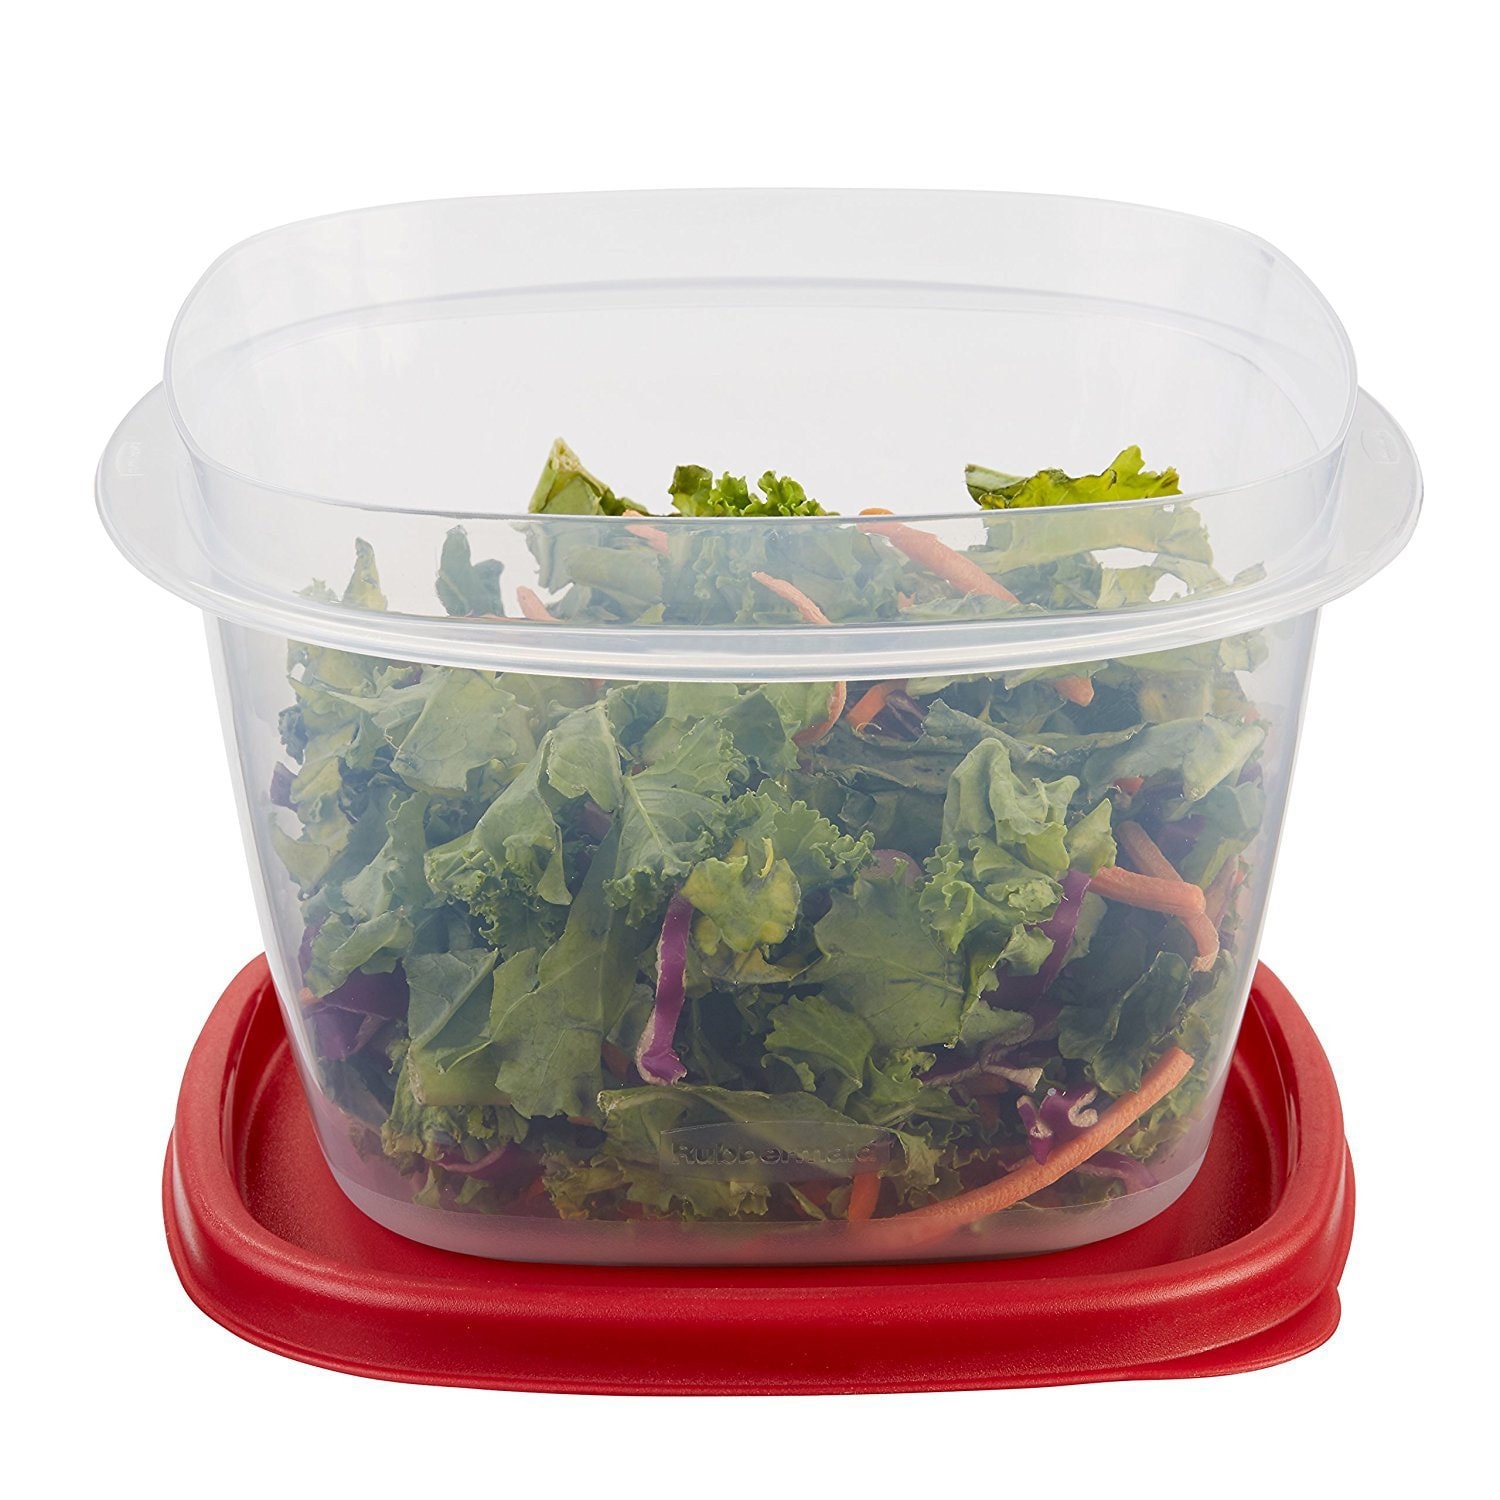 https://ak1.ostkcdn.com/images/products/is/images/direct/2e6577a54b531d38c894f981dca5746cce19883e/Rubbermaid-Easy-Find-Lid-Food-Storage-Container%2C-7-Cup%2C-Red.jpg